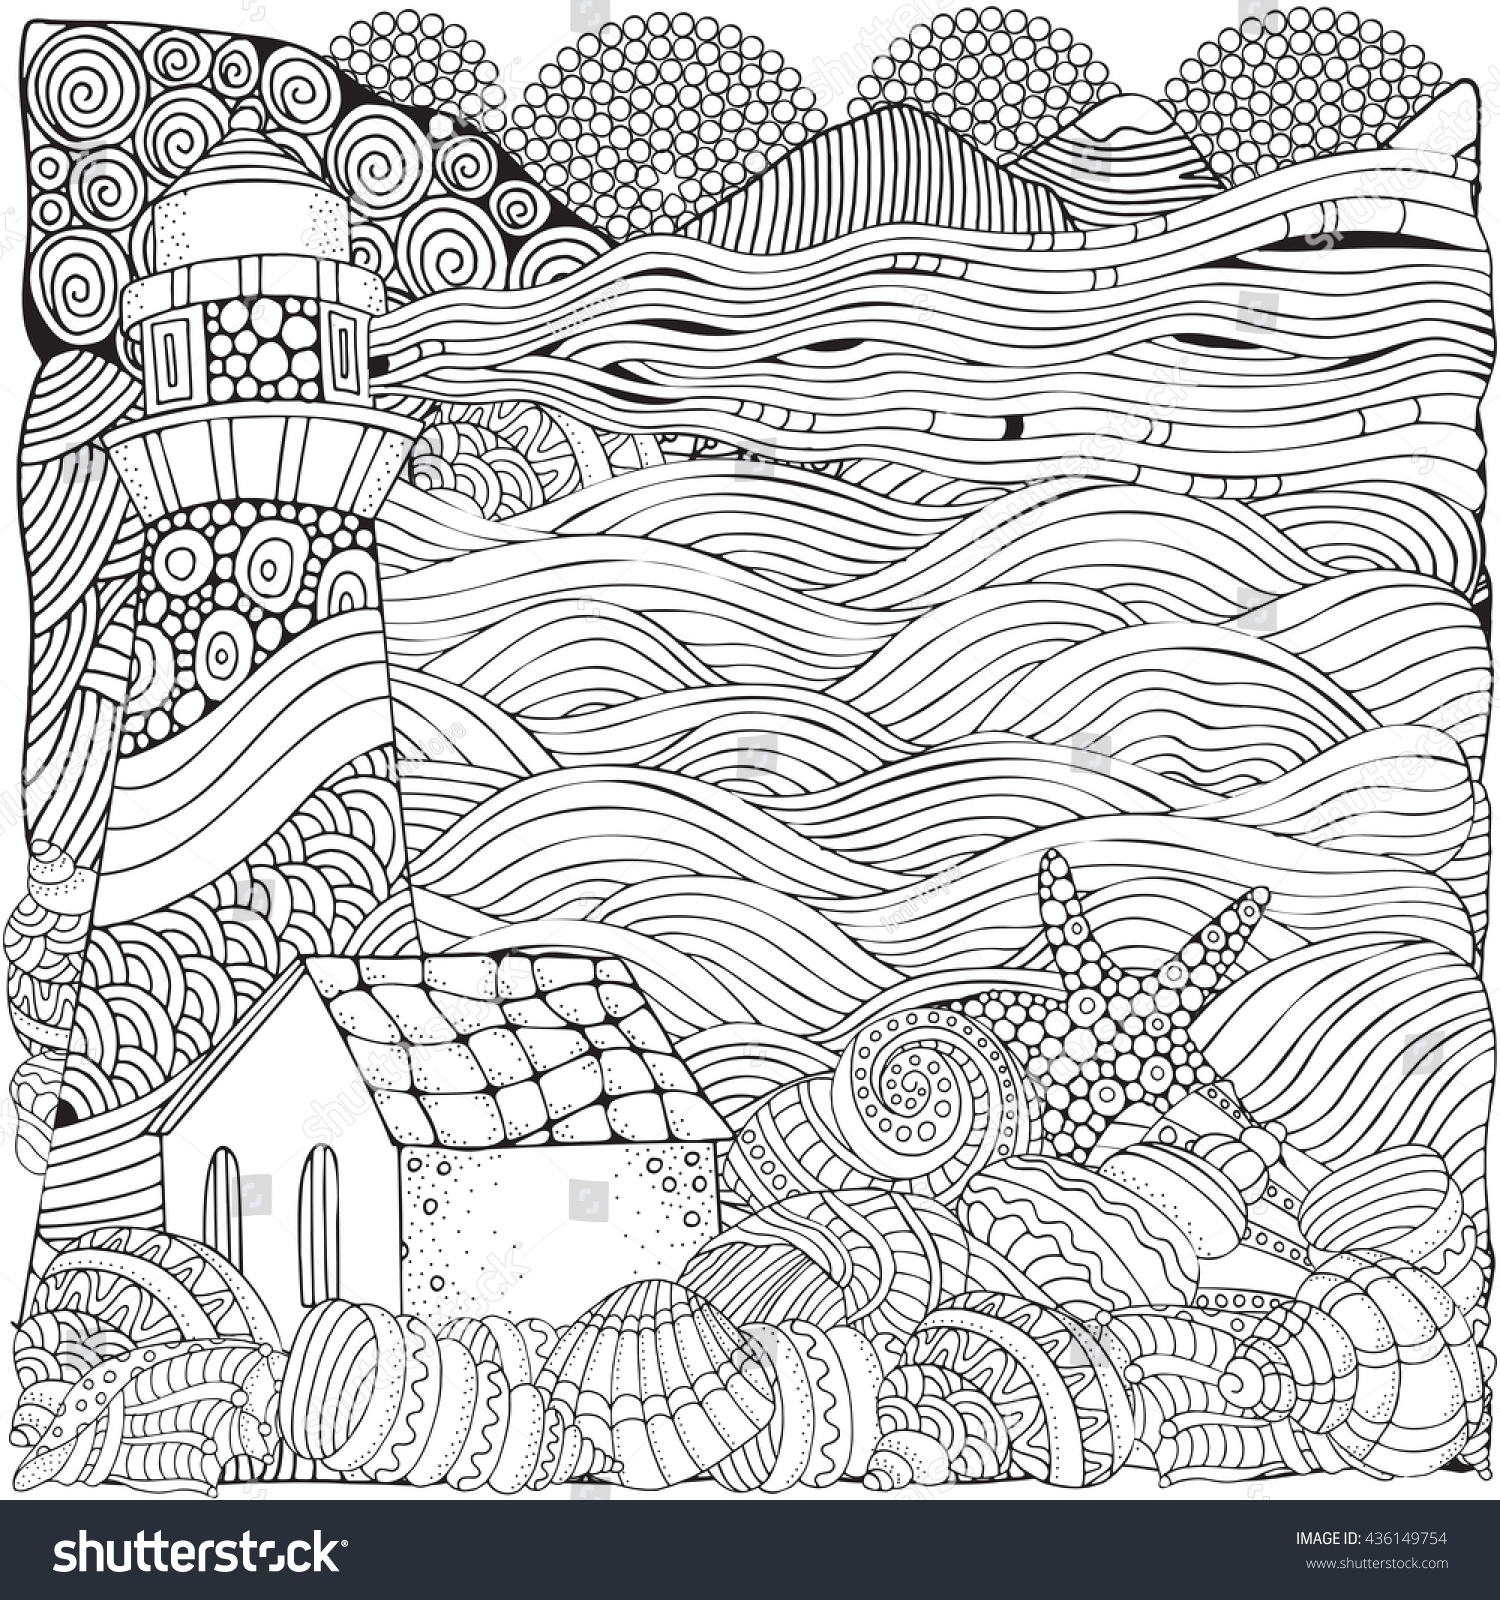 Lighthouse and shells seascape Coloring book page for adult Waves sea